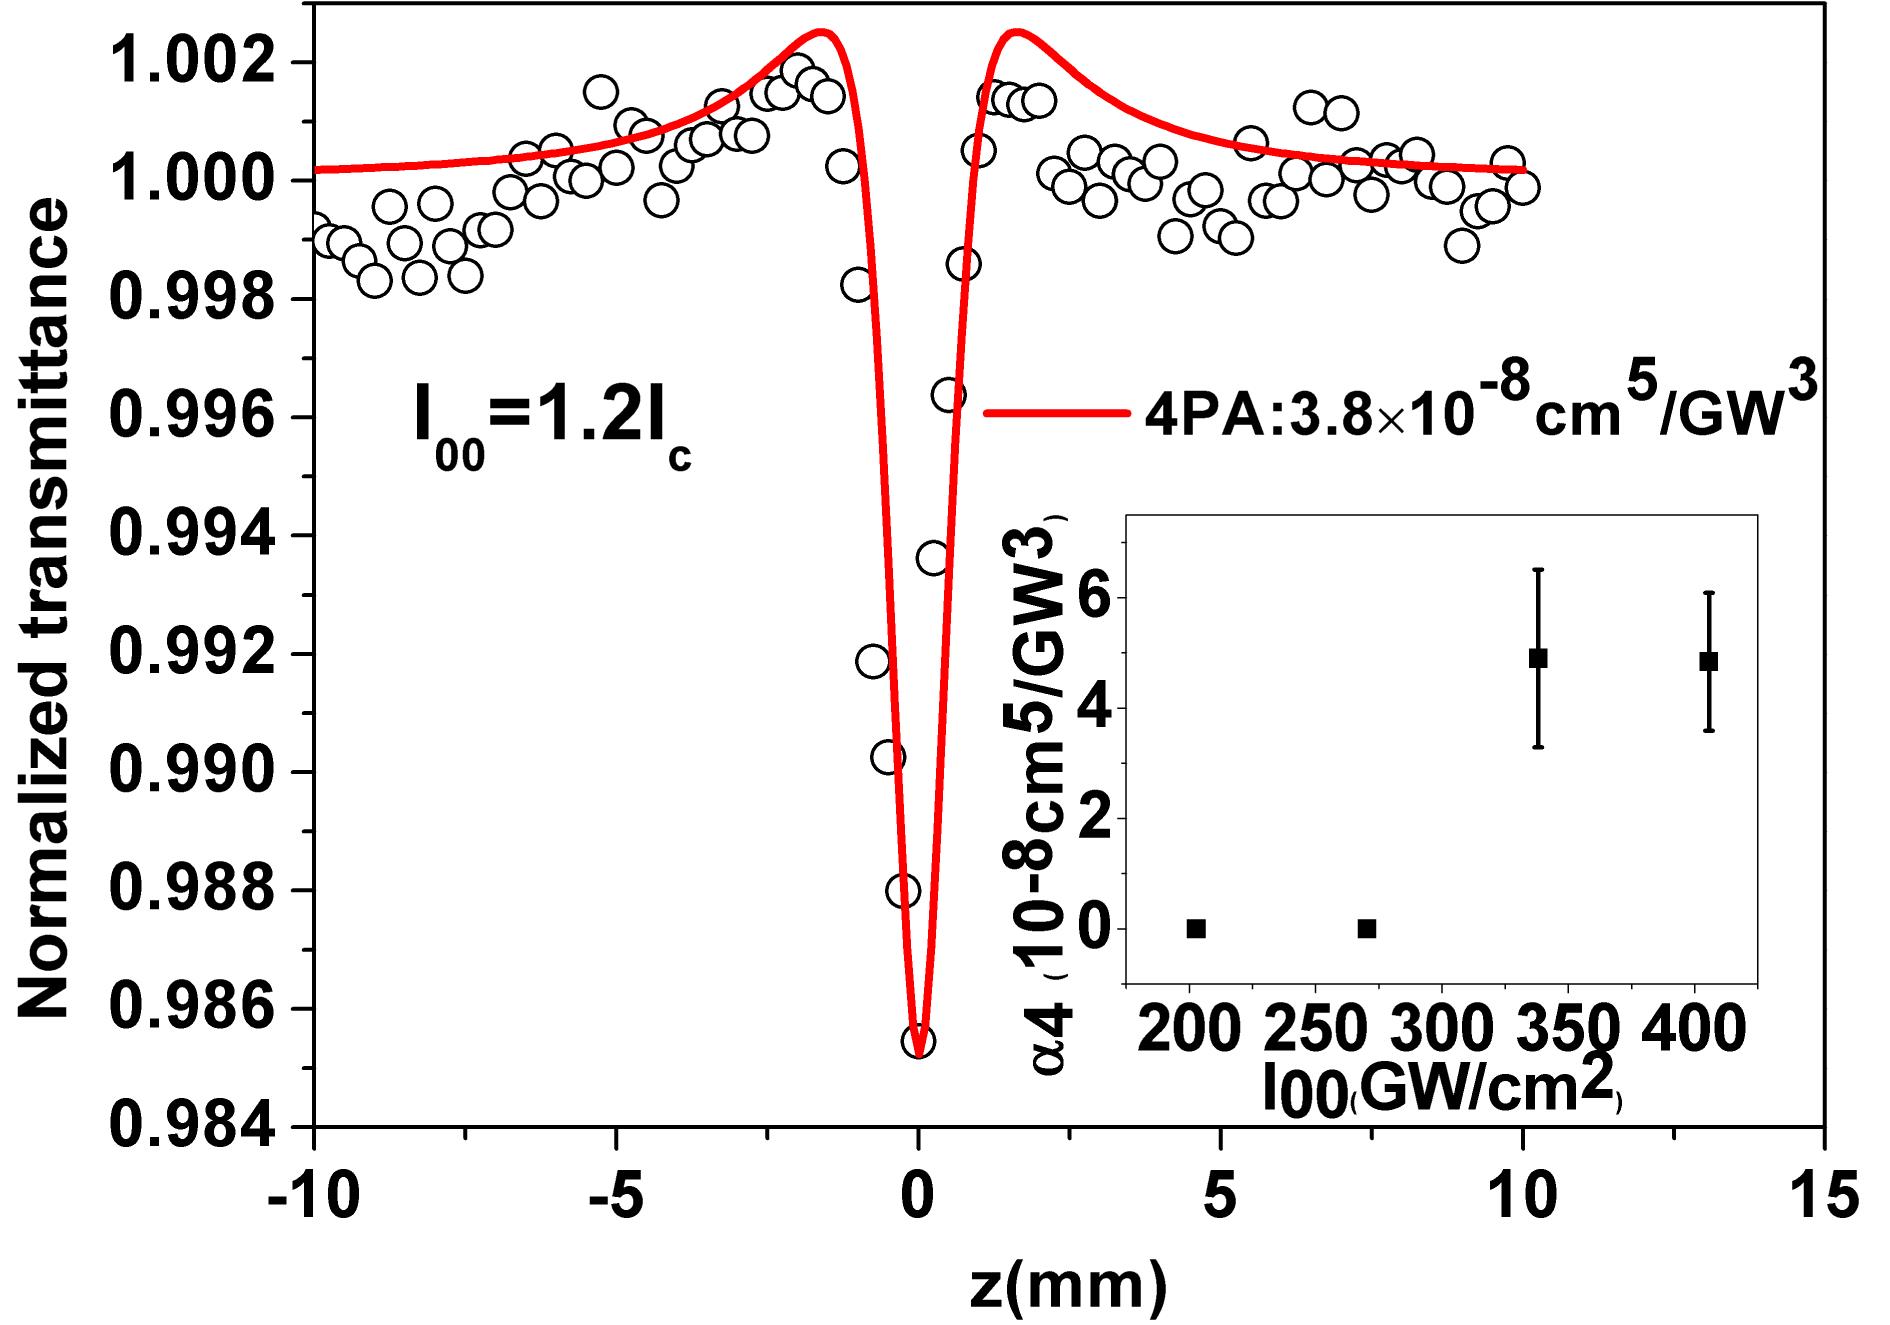 Representative OA Z-scan trace for the DKDP crystal at an excitation intensity of . The circular symbols represent the experimental data, while the solid line is the theoretical fitting result by the use of the 4PA theory. The inset is the 4PA coefficient of the DKDP crystal at different excitation laser intensities, while the error bars are the standard deviation from five Z-scan experiments.